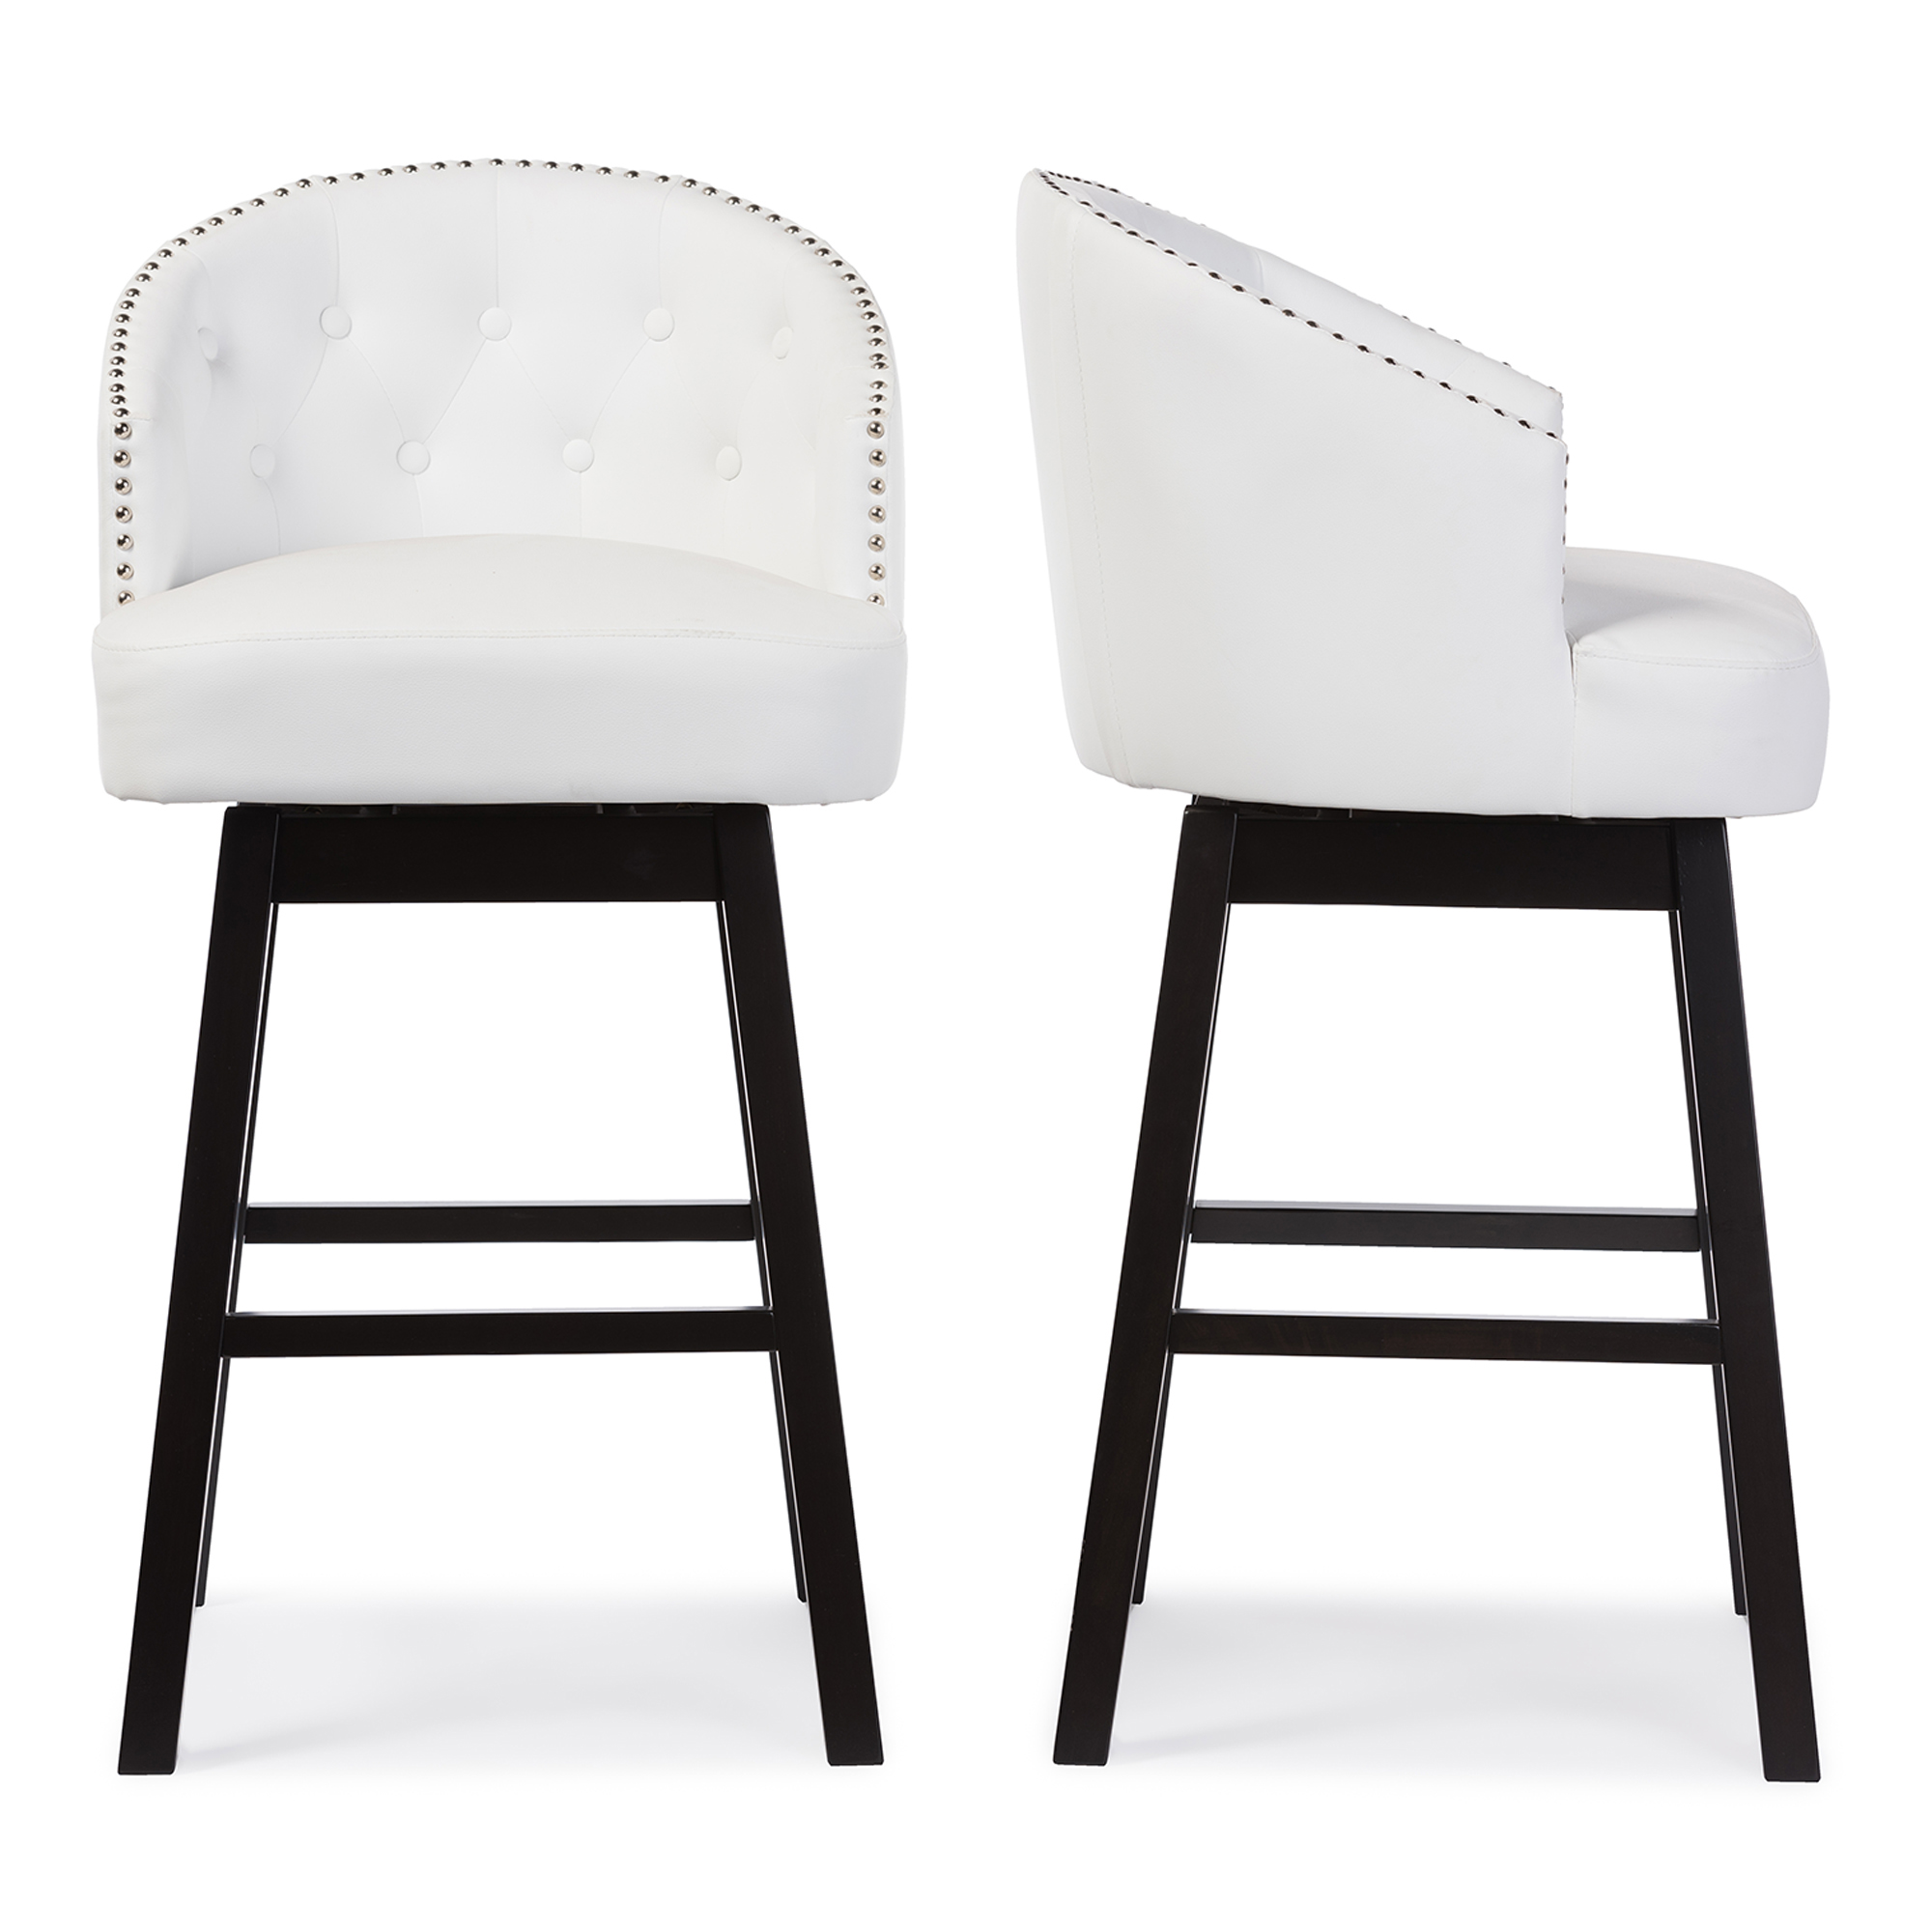 Baxton Studio Avril Modern and Contemporary White Faux Leather Tufted Swivel Barstool with Nail heads Trim